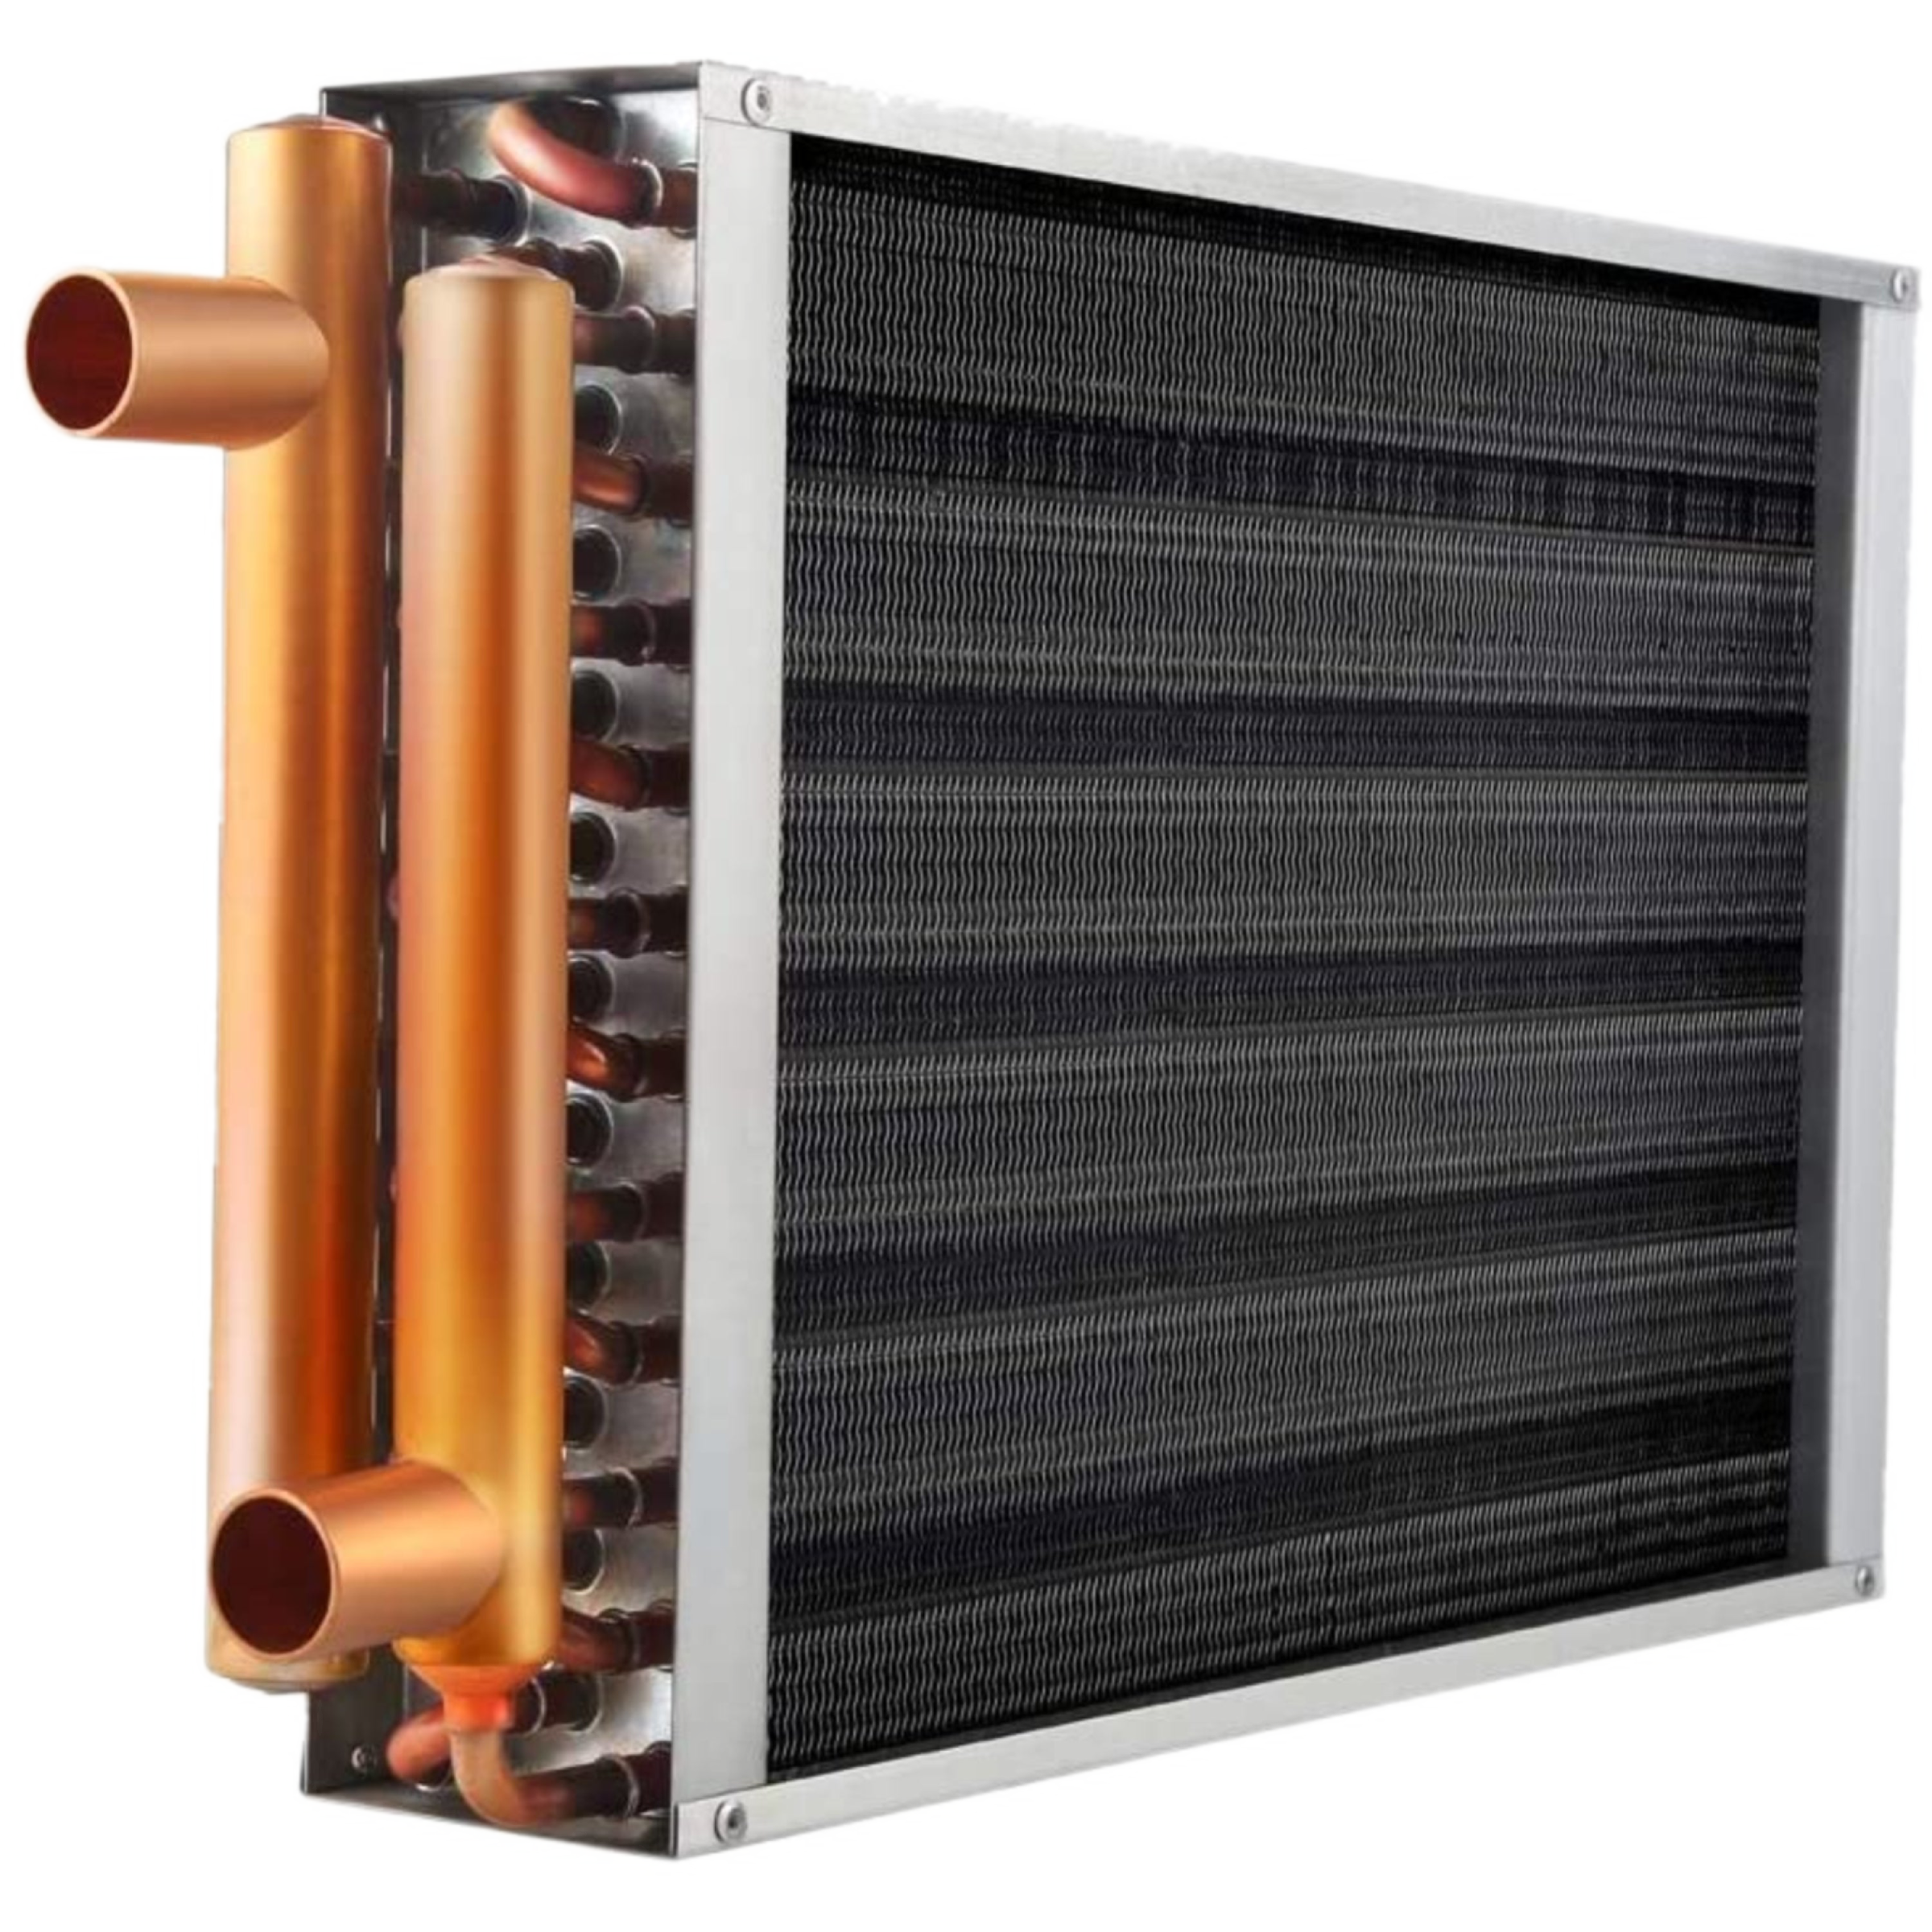 HTL 16 X 18 Hydronic Coil Air to Water Heat Exchanger 10GPM, PD0.81 PSI, 89100 BTU/h to 100000 BTU/h